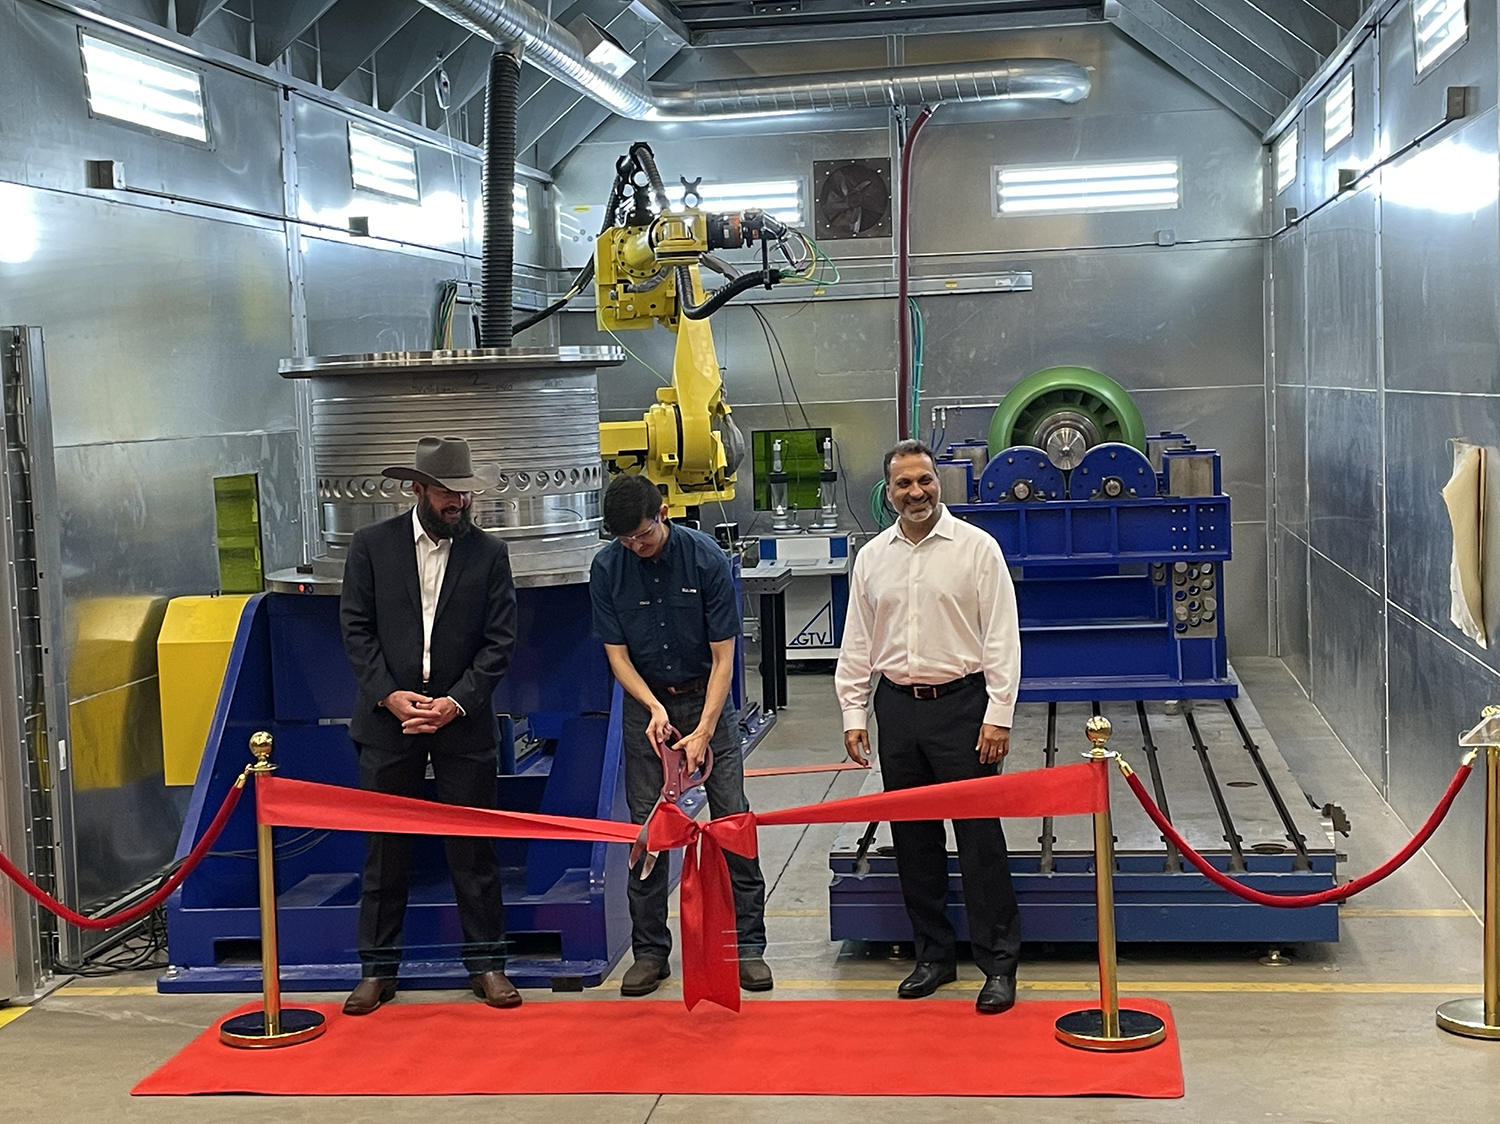 The event was launched by Darayus Pardivala, President of Sulzer Services, Americas and then followed by an introduction of LMD services available, benefits and applications by Michael Andrepont and Alonzo Oritz.